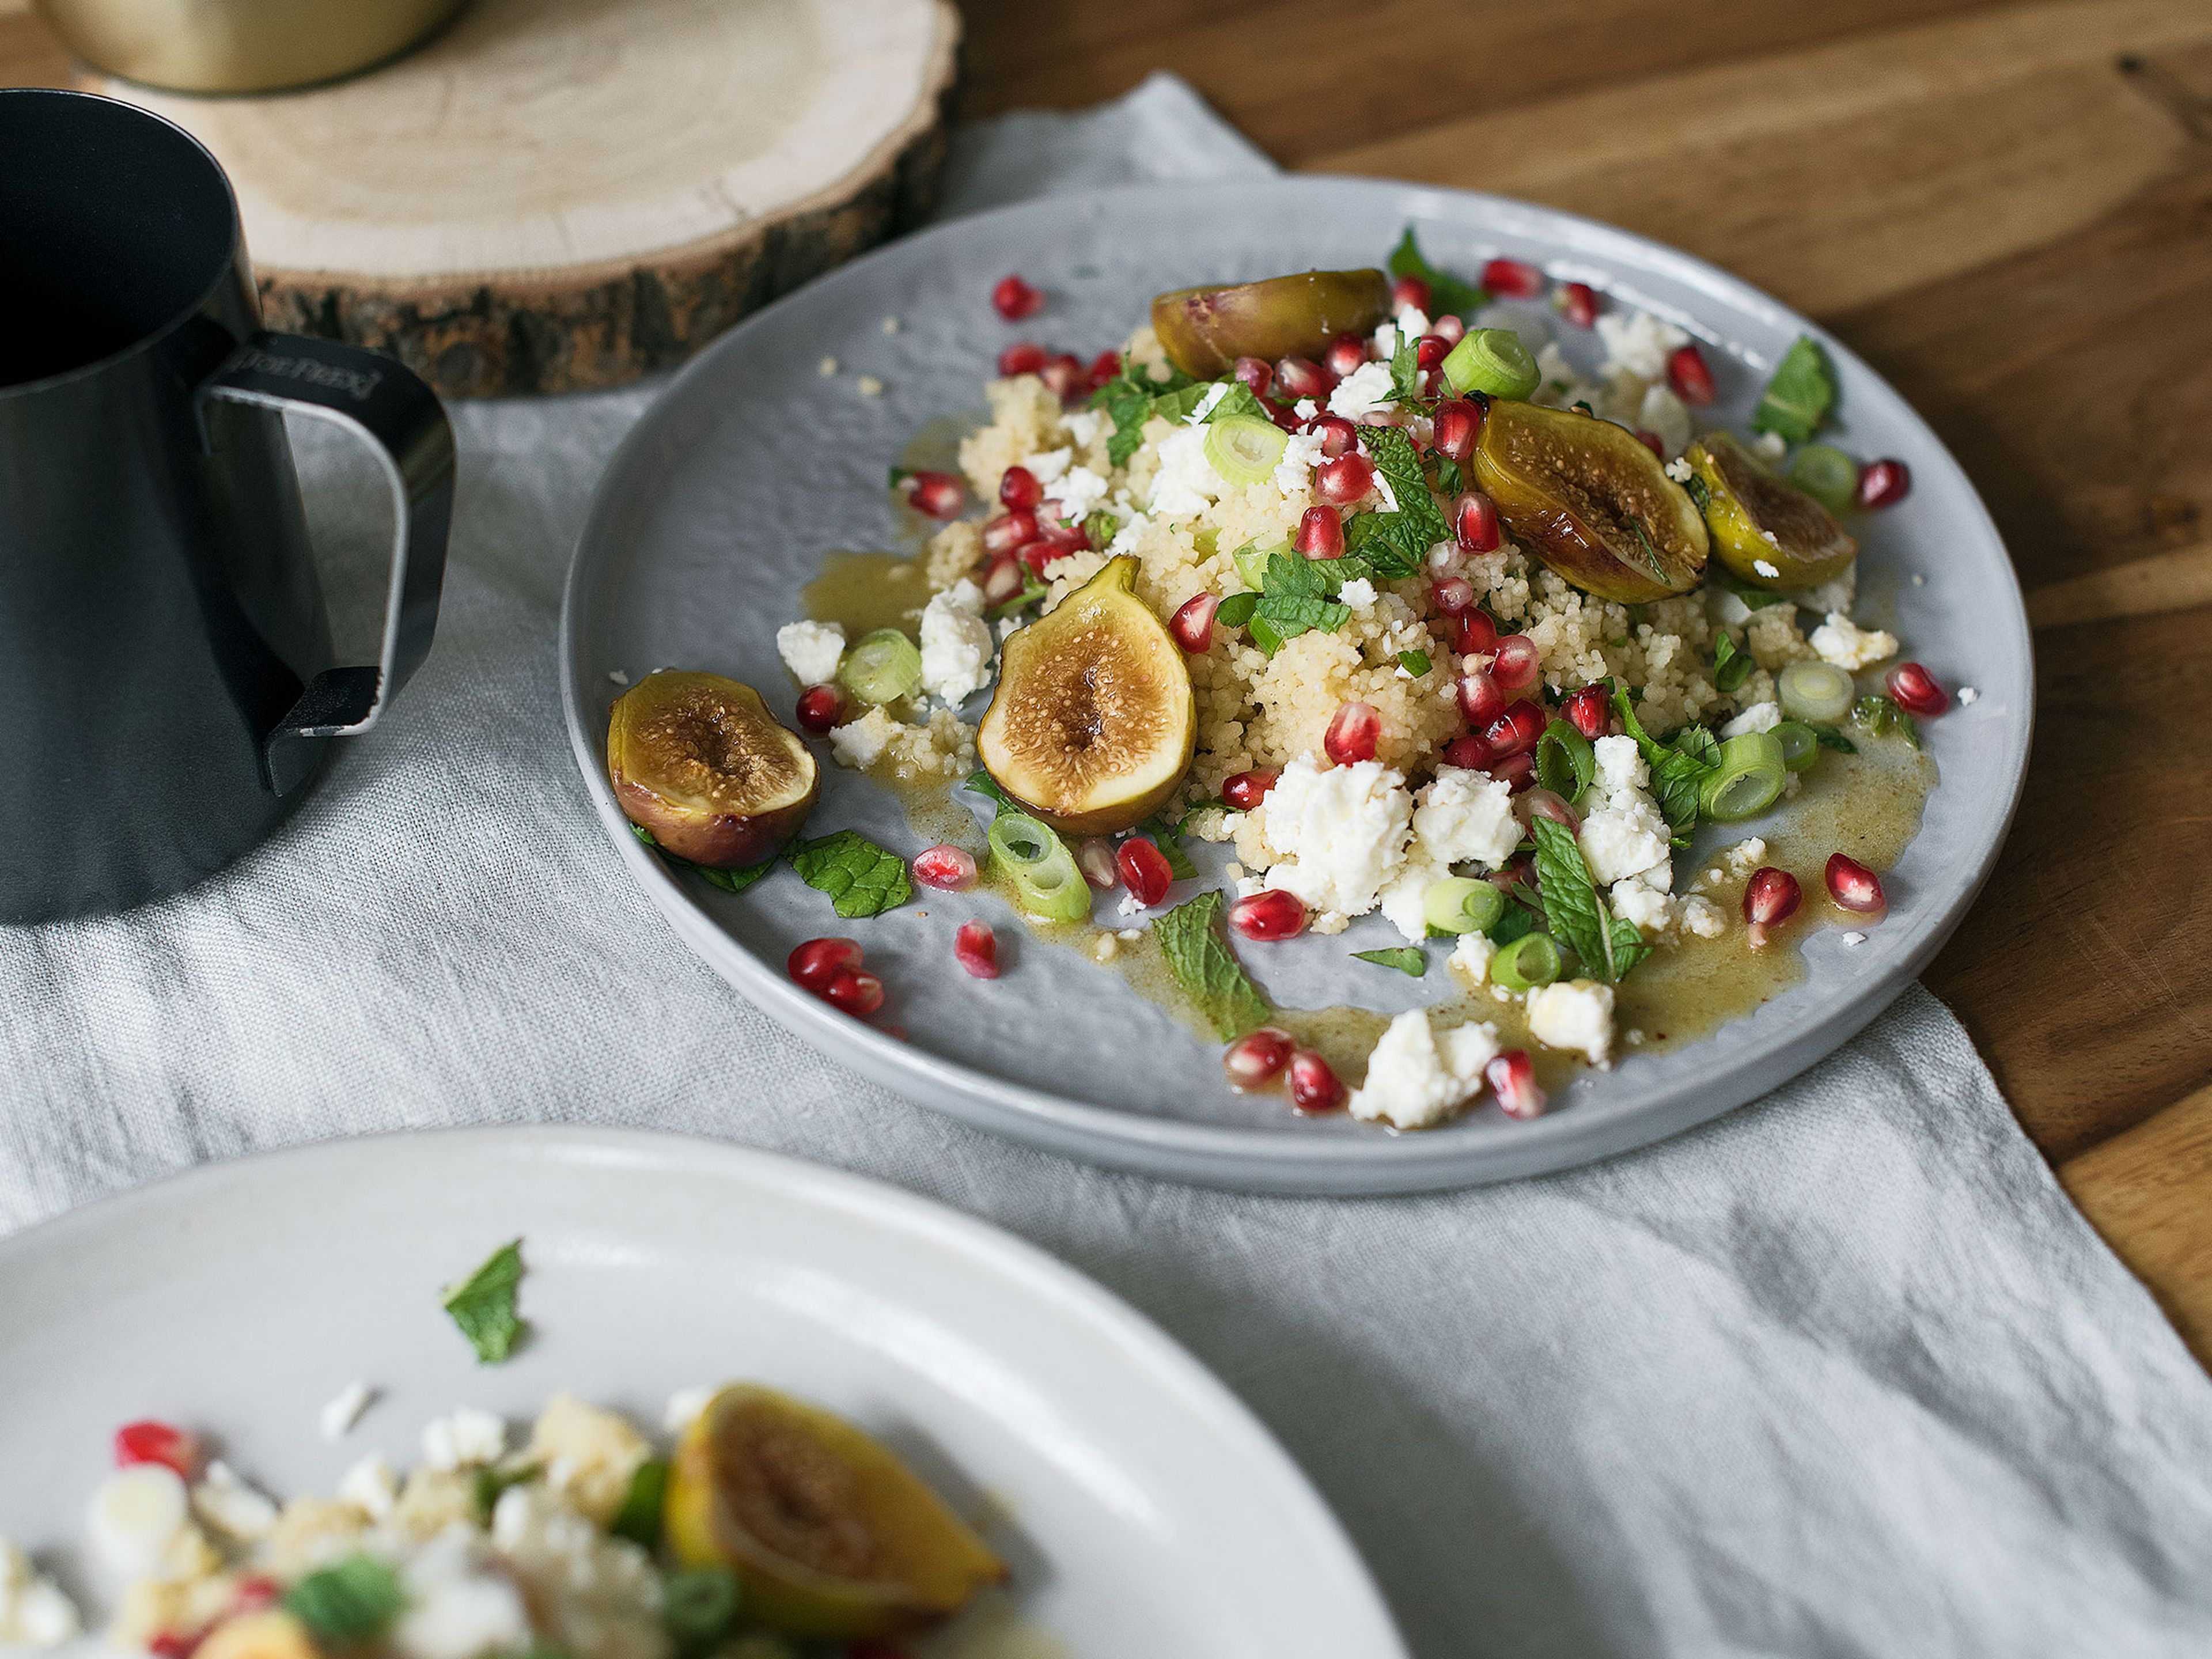 Middle-Eastern couscous salad with figs